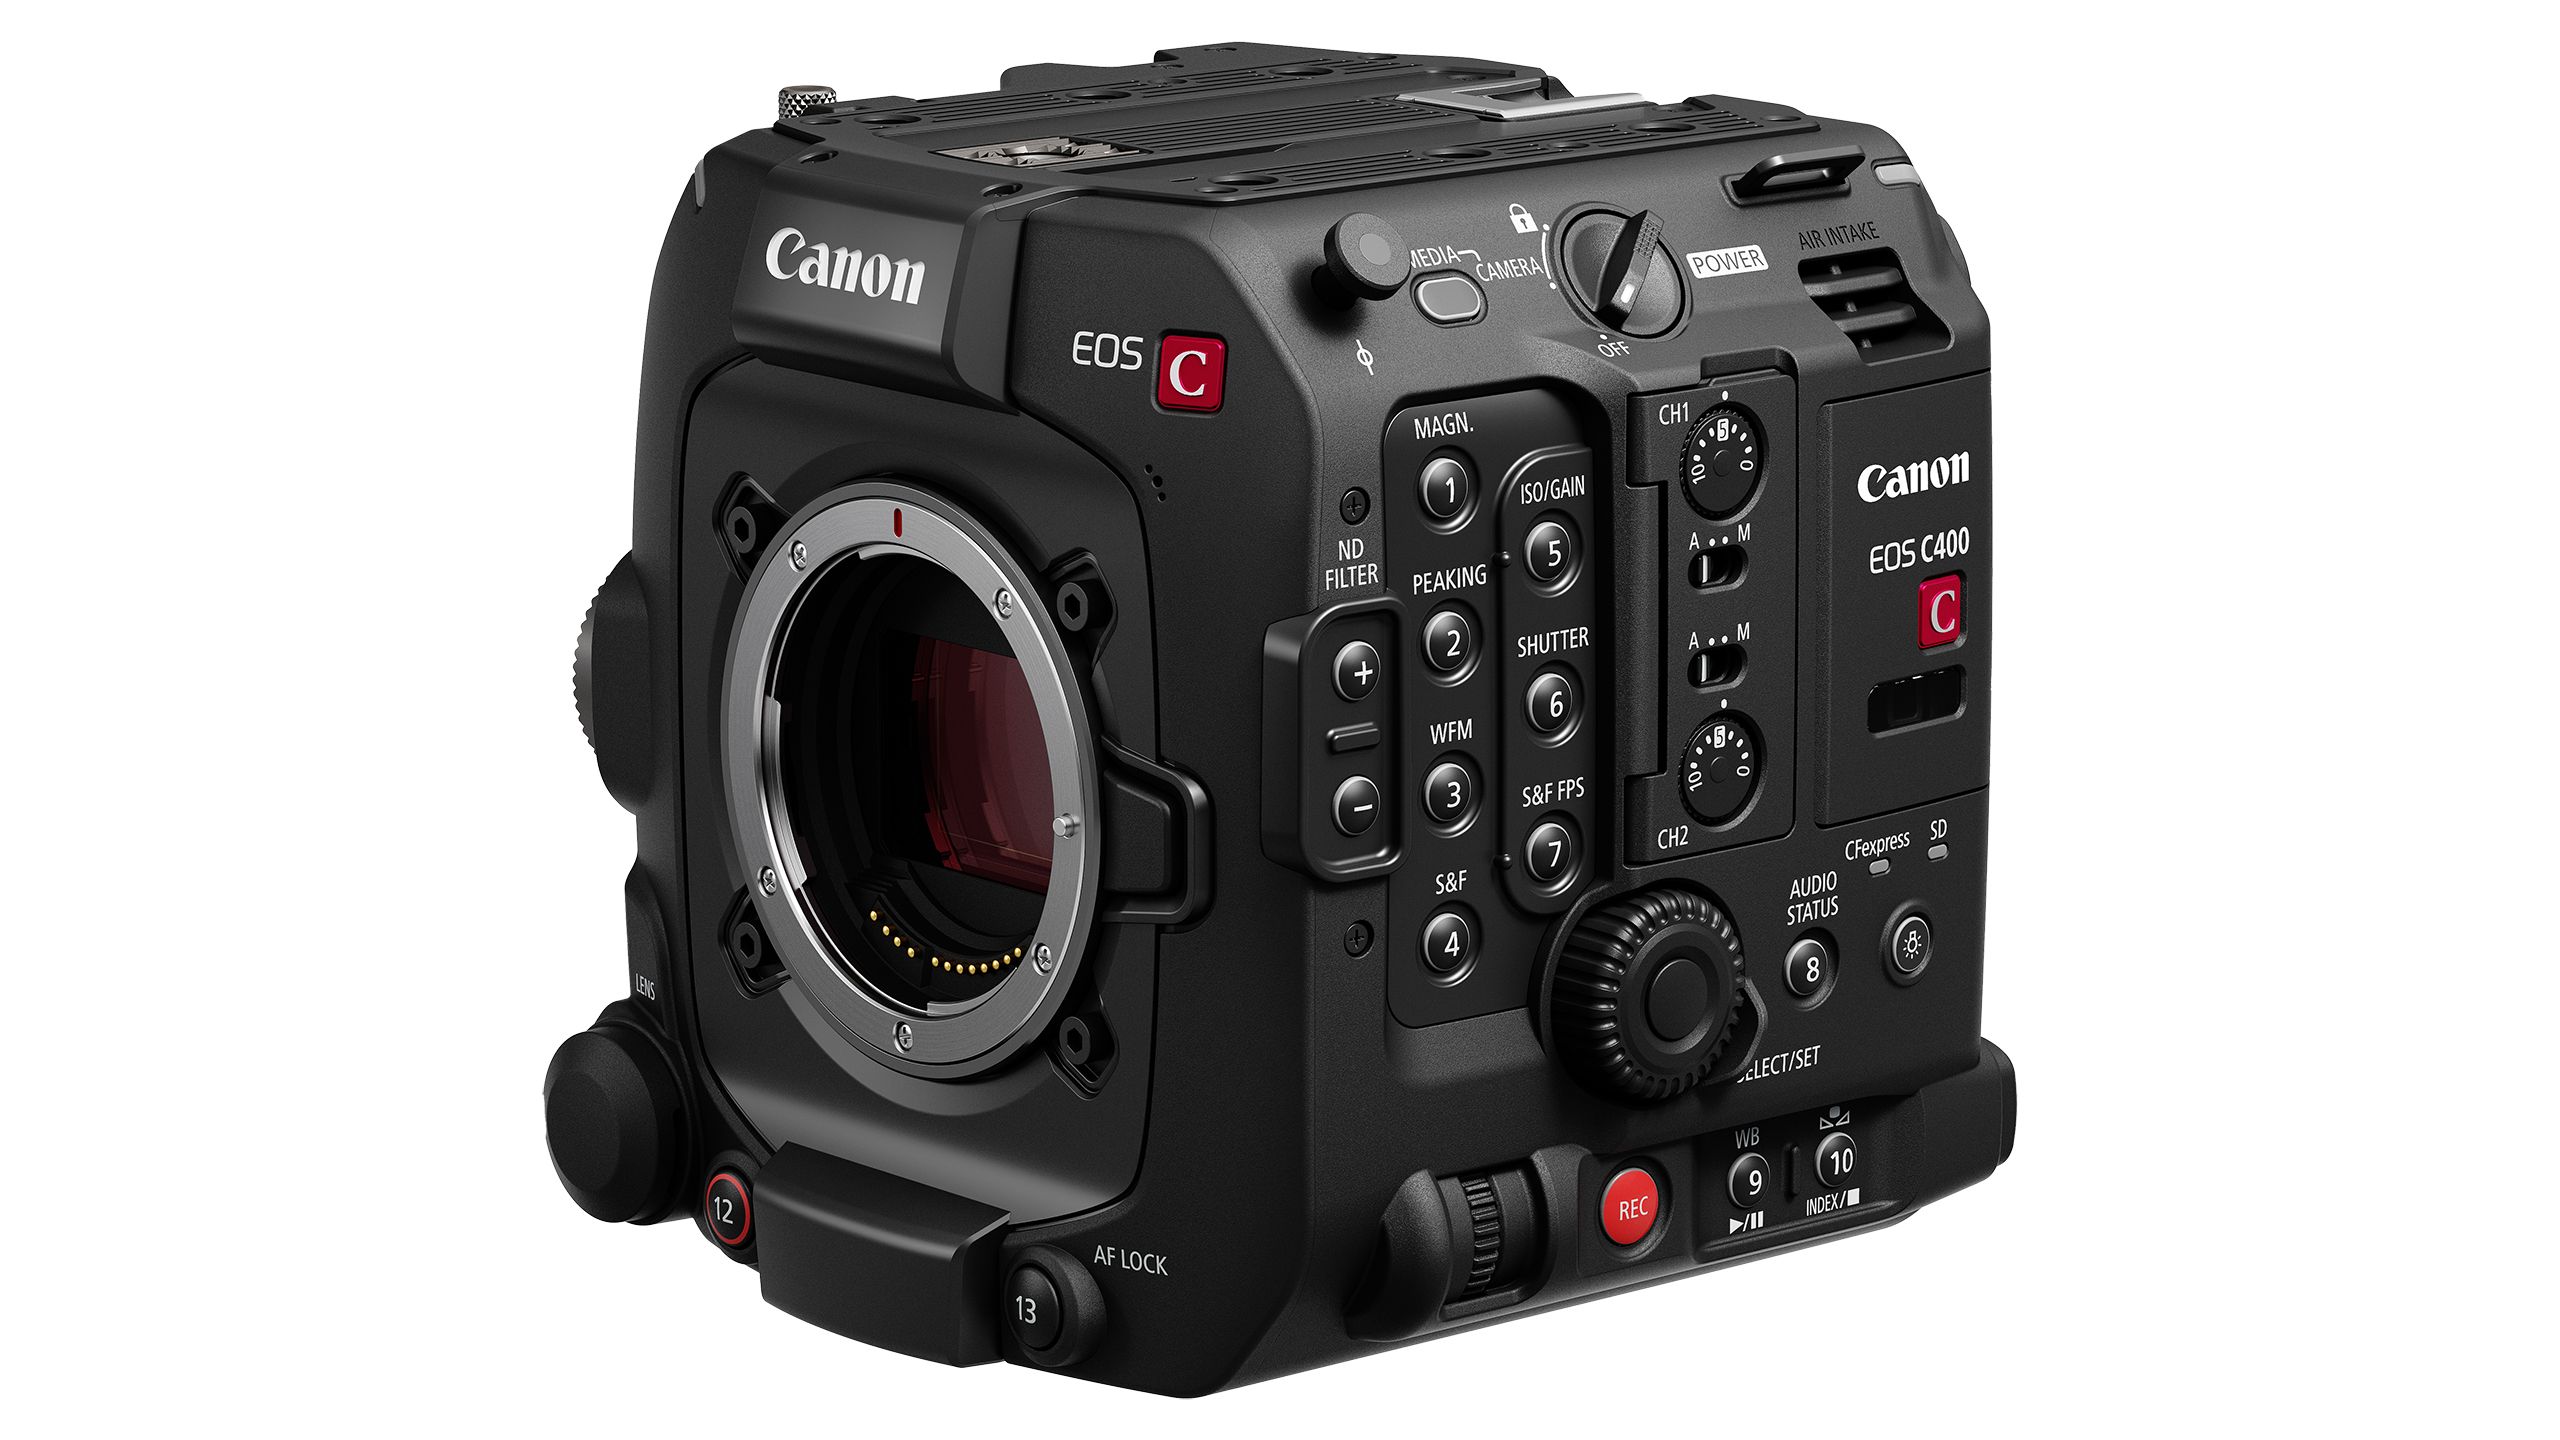 The Canon EOS C400 camera against a white background.